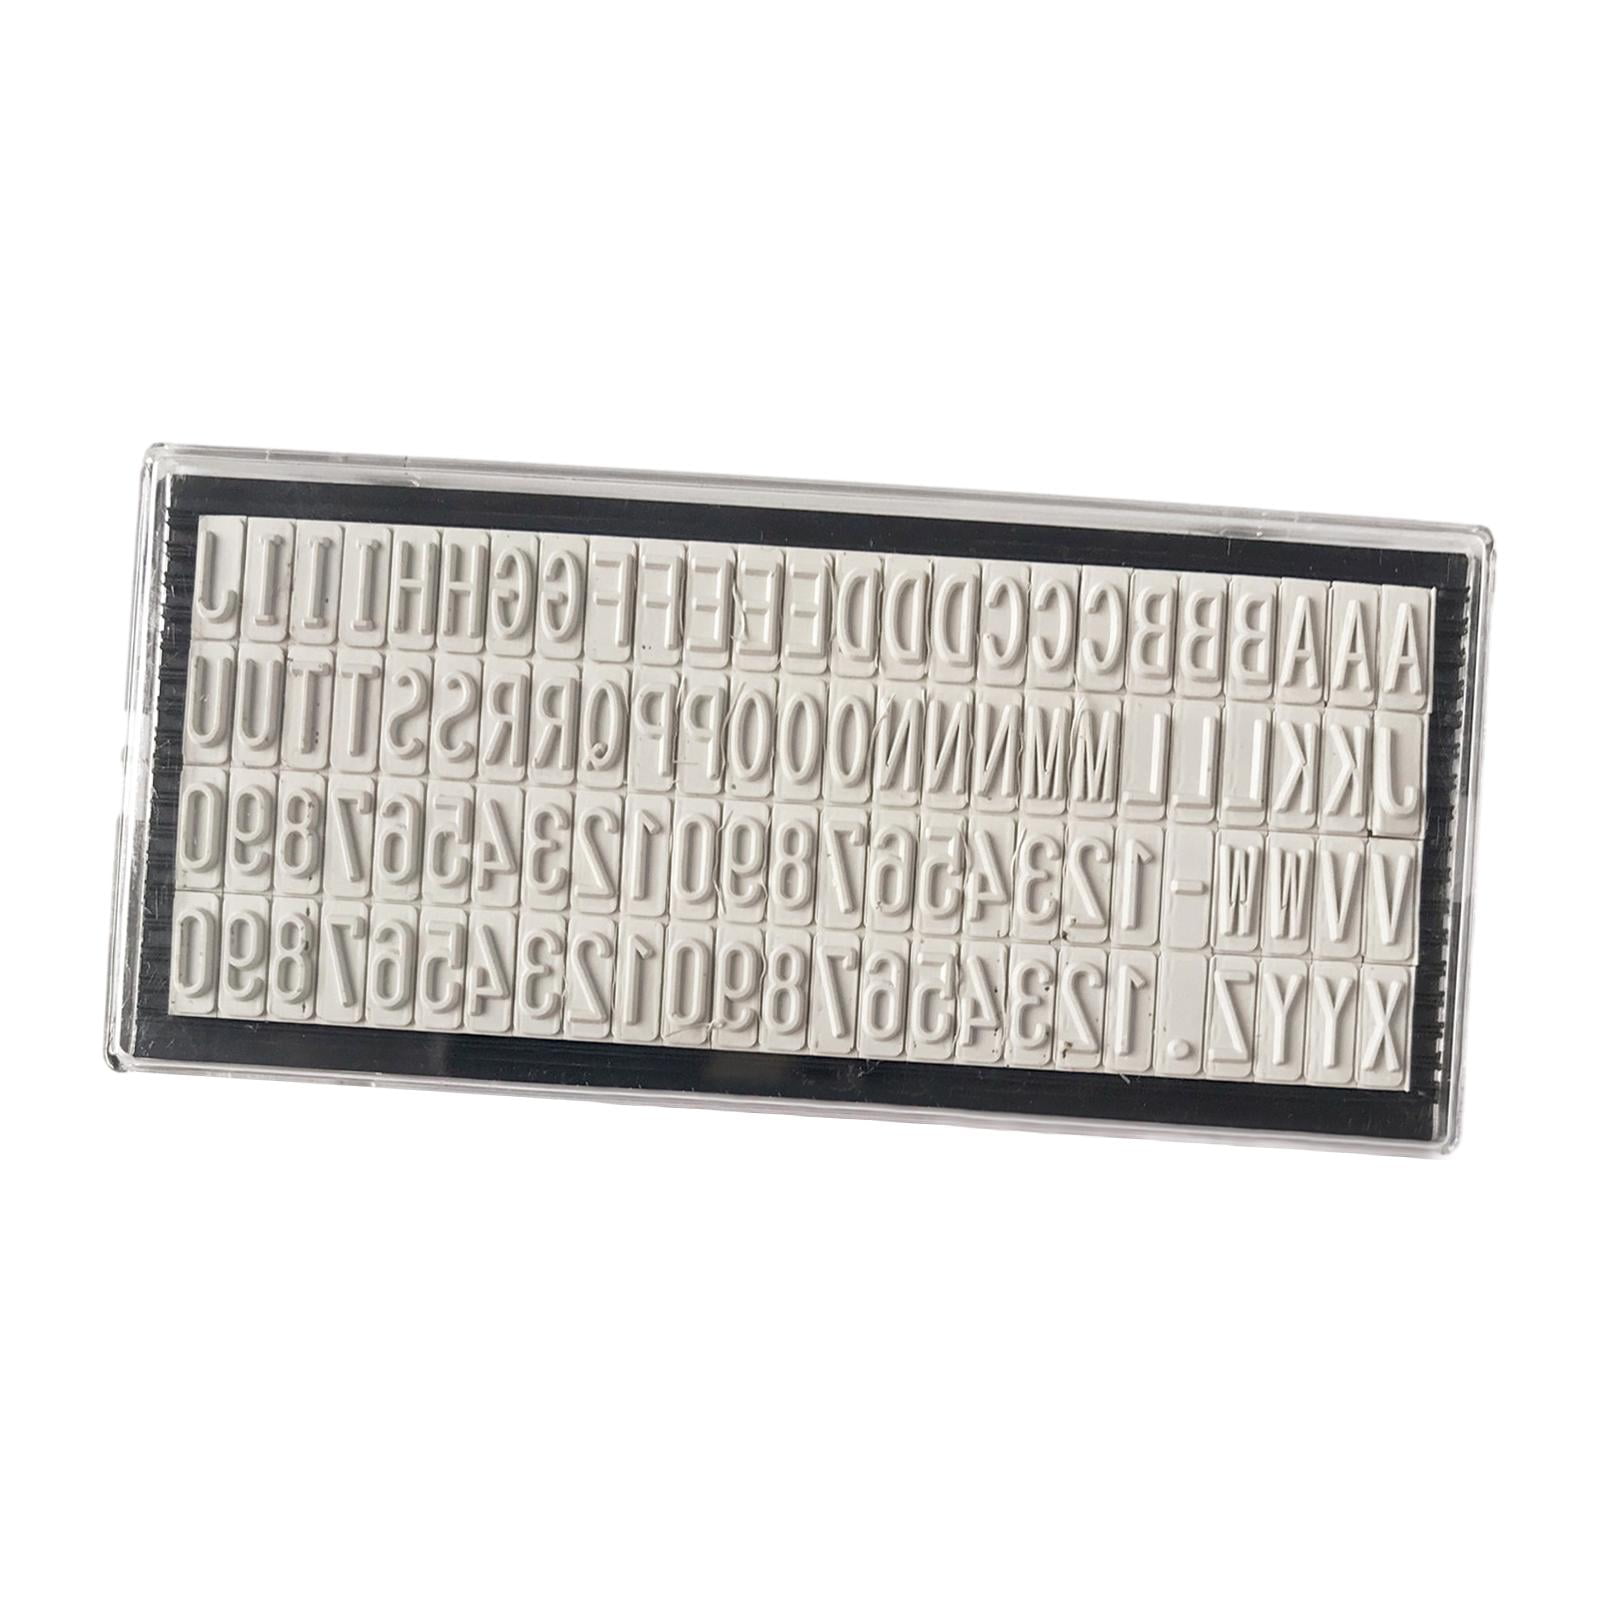 3mm/4mm/6.4mm Stamp Letters Plate Custom Personalised Name Address